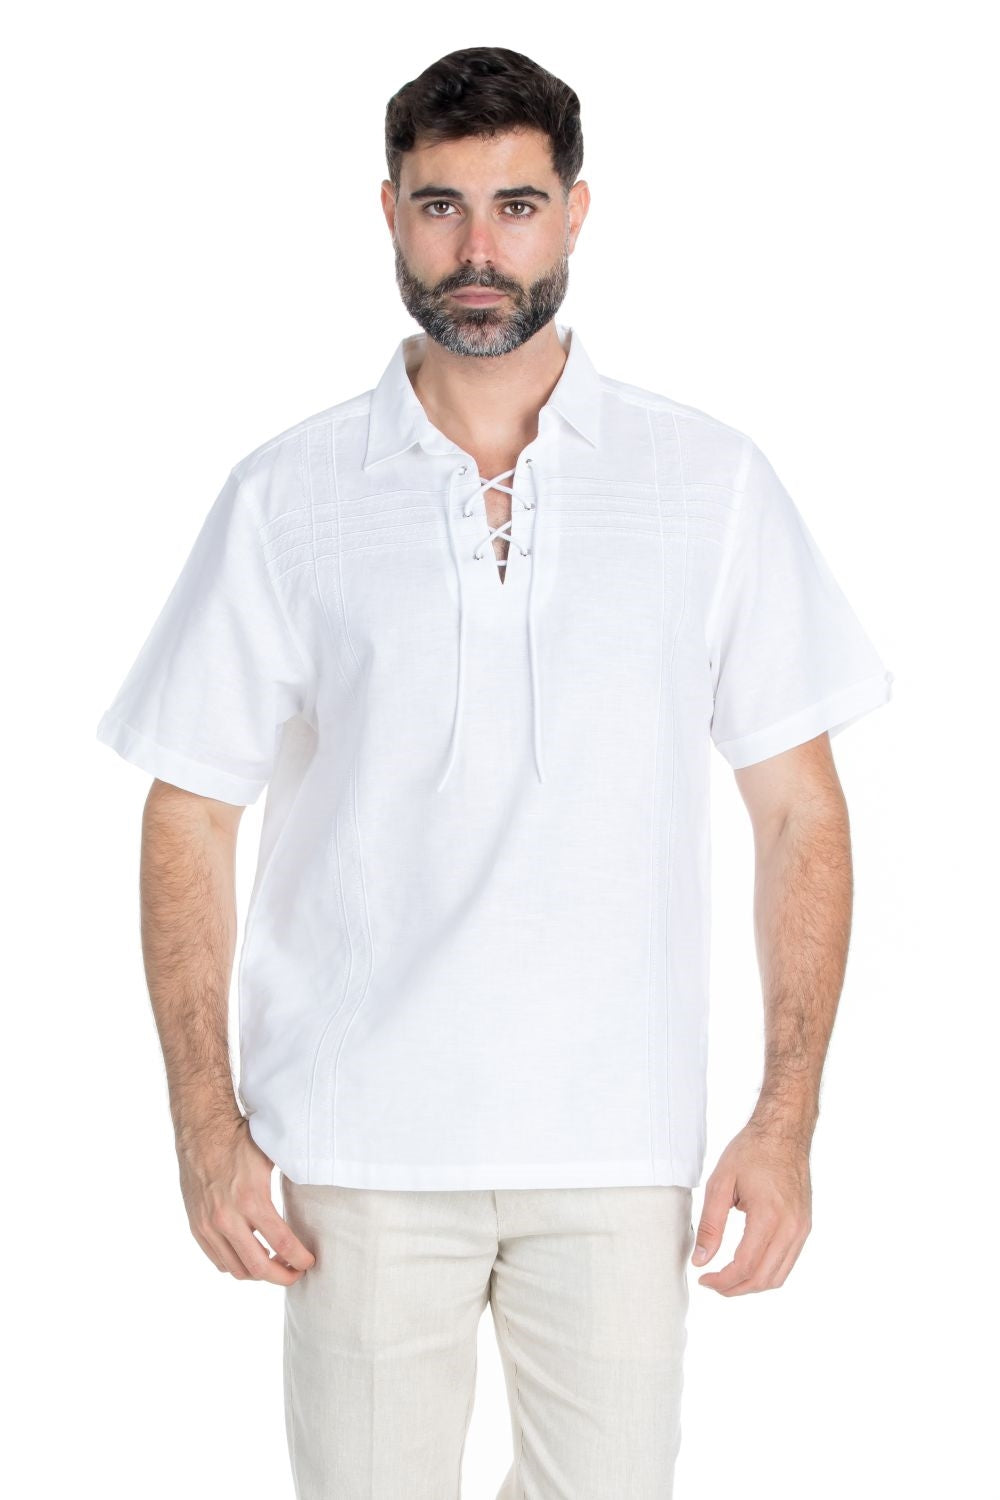 Men's Beach Resort Wear Embroidered Linen Shirt Short Sleeve Lace Up Collar - Mojito Collection - Beachwear, Mens Shirt, Mojito Linen Shirt, Resort Wear, Short Sleeve Shirt